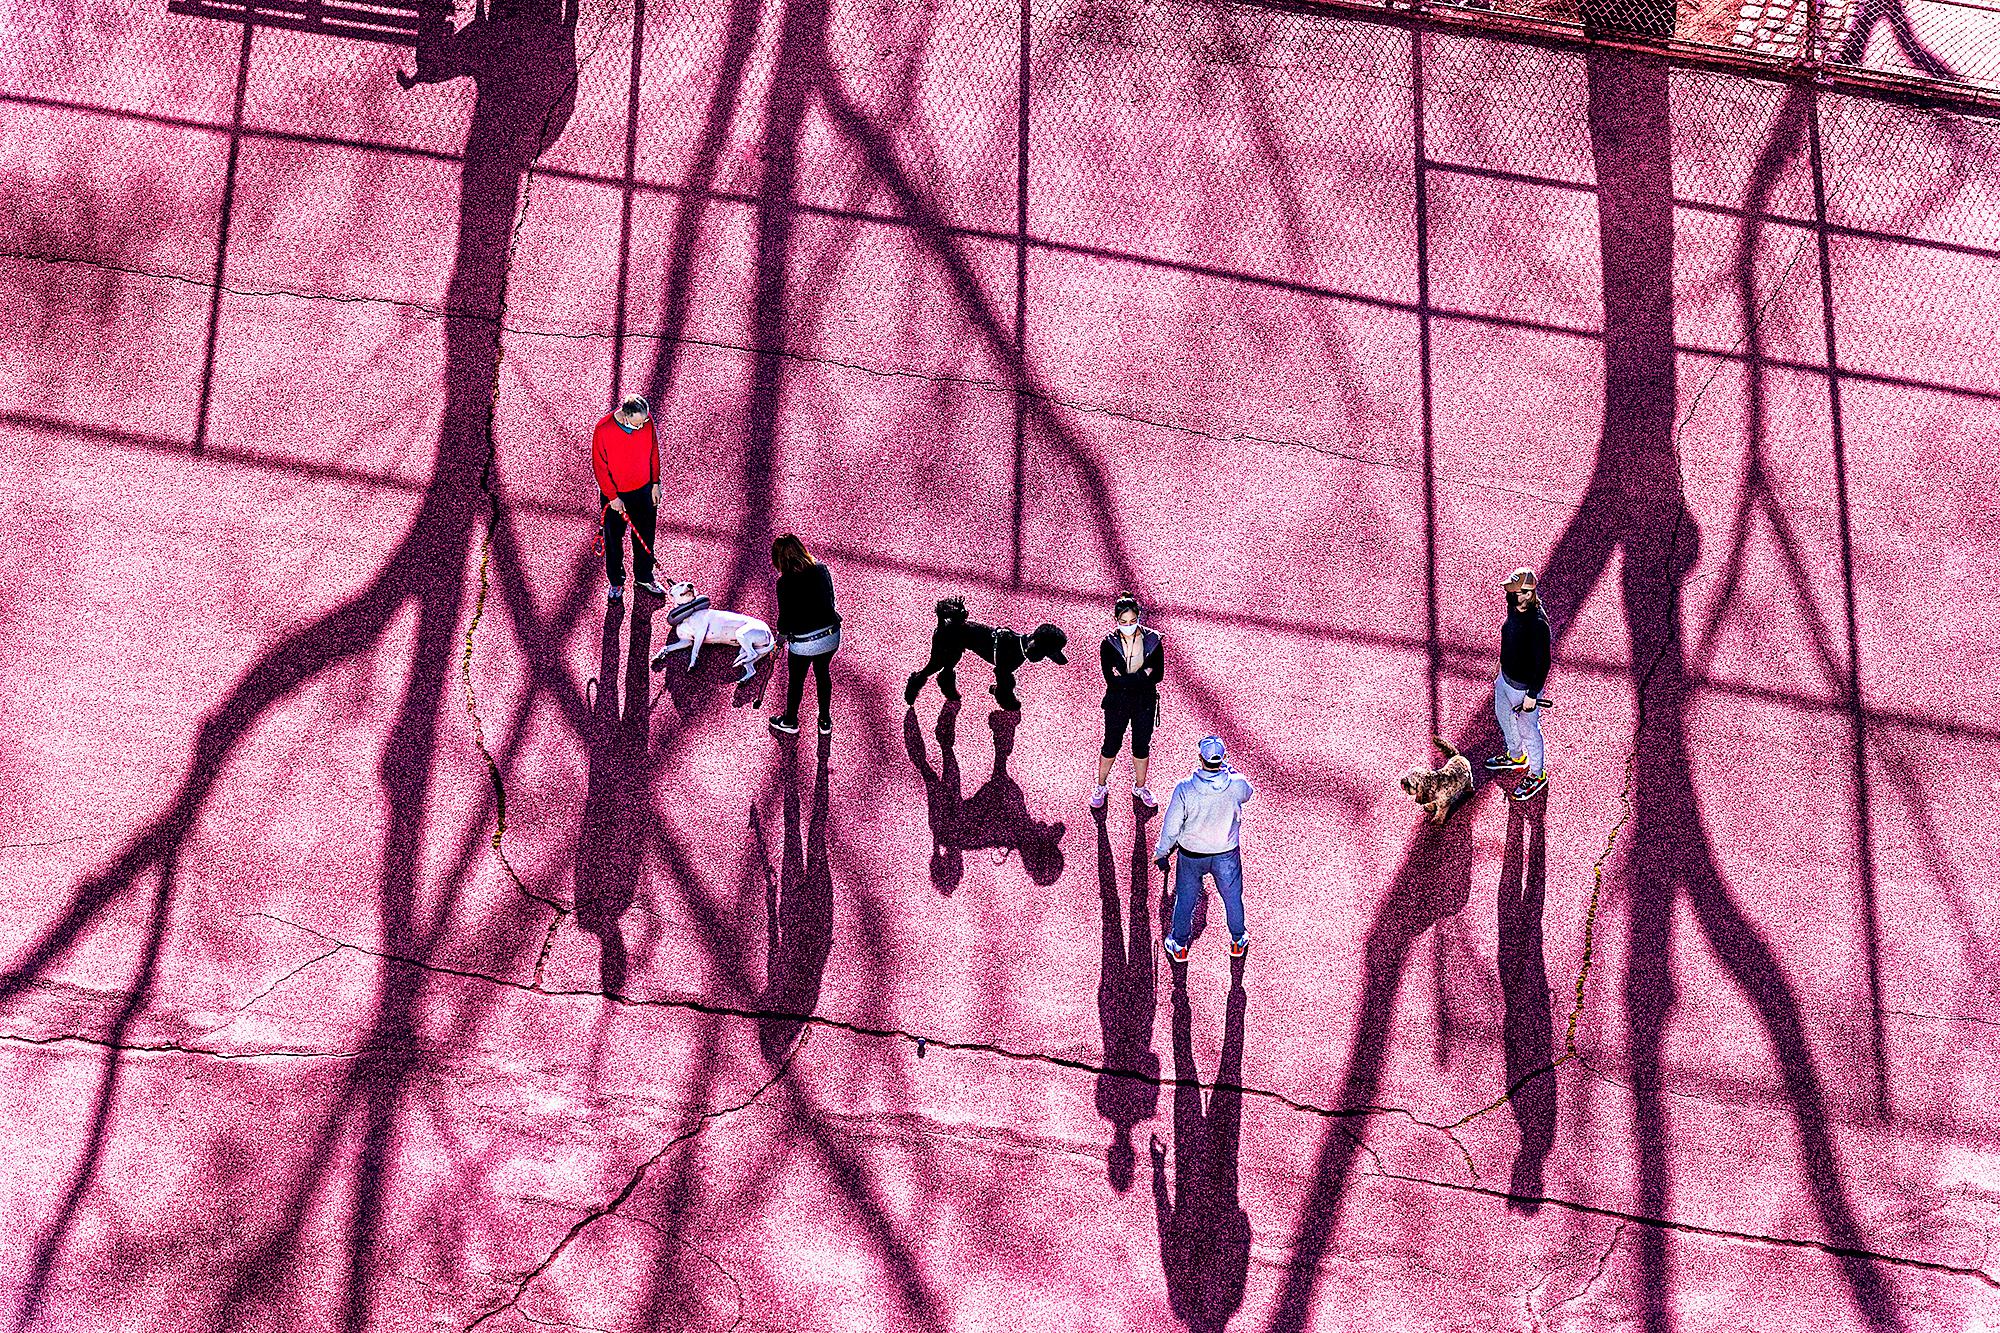 Mitchell Funk Landscape Photograph - Dog Park in Magenta  - Dogs and People having Fun